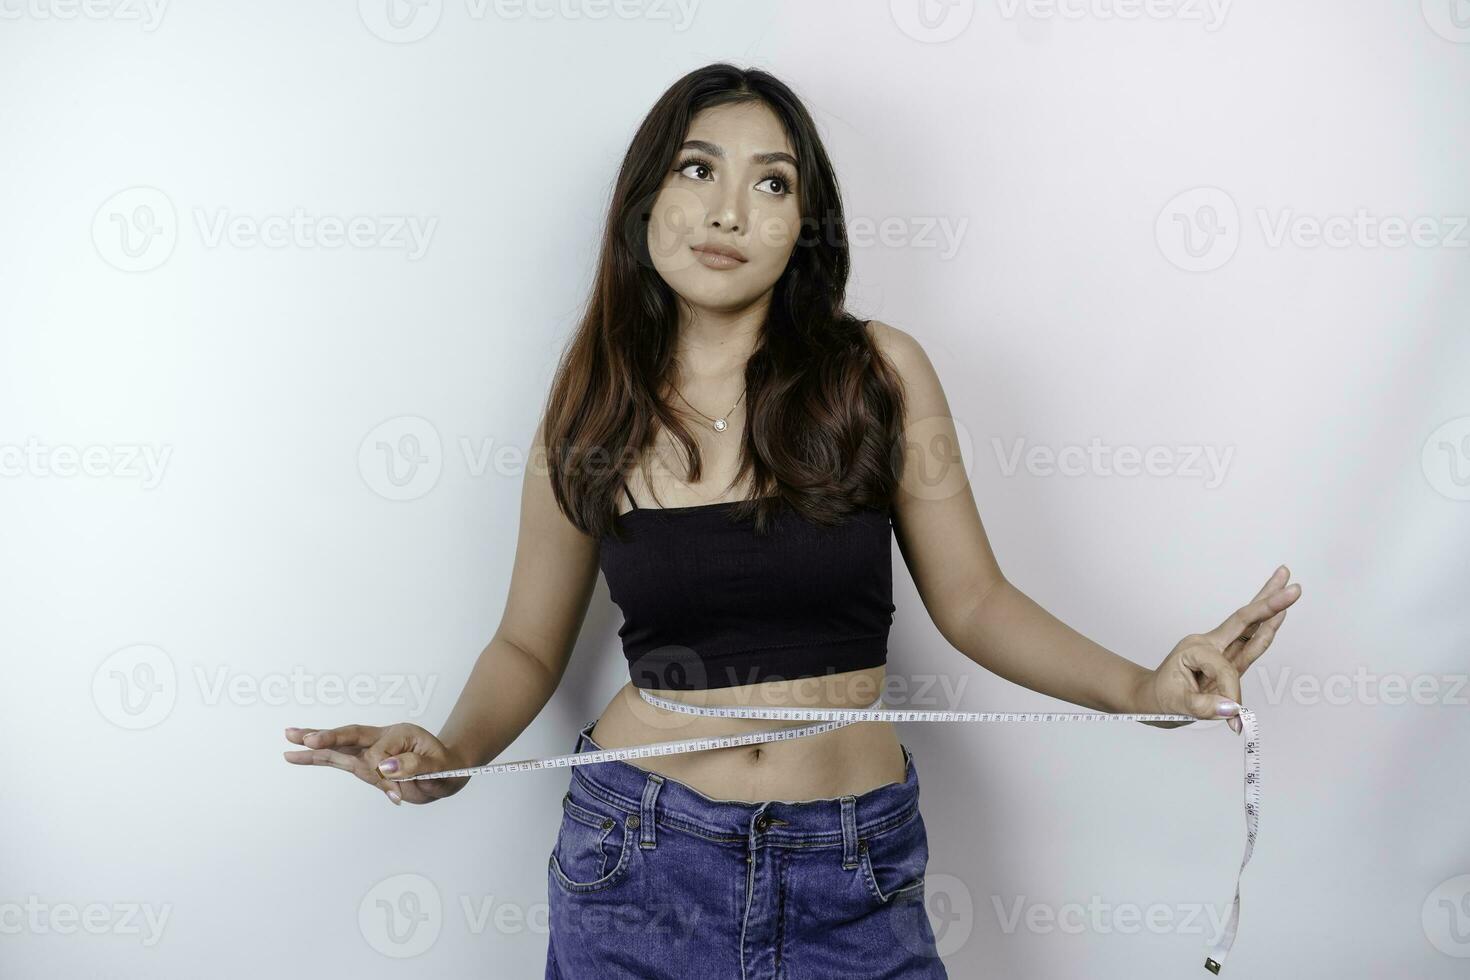 Weight loss, slim body, healthy lifestyle concept. Fit fitness Asian girl measuring her waist with measuring tape, isolated by white background photo